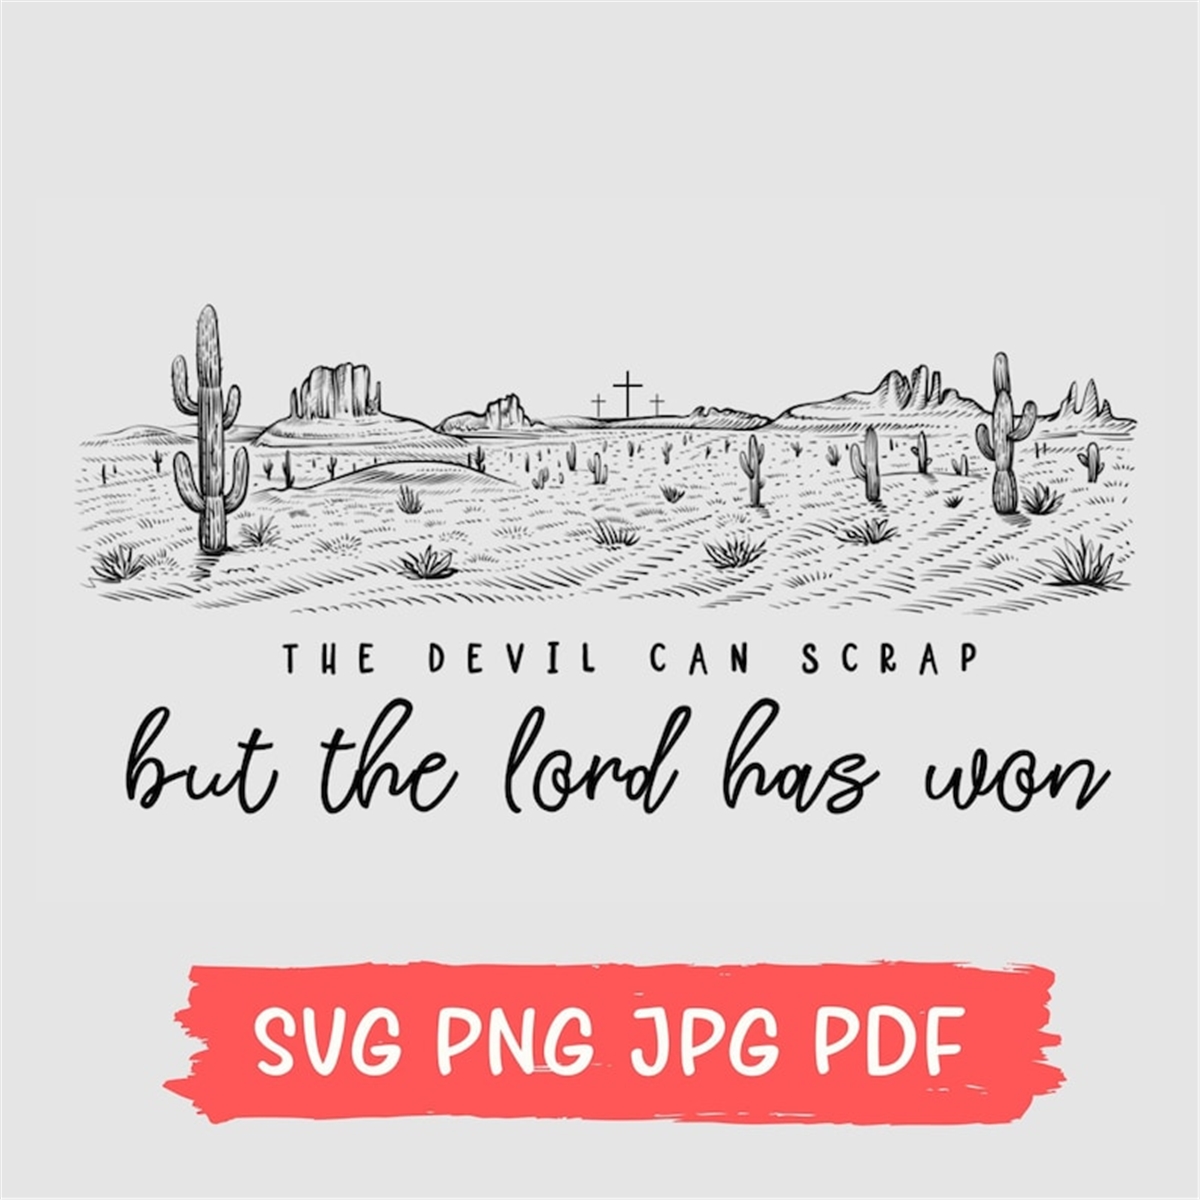 the-devil-can-scrap-but-the-lord-has-won-svg-png-zach-bryan-image-1